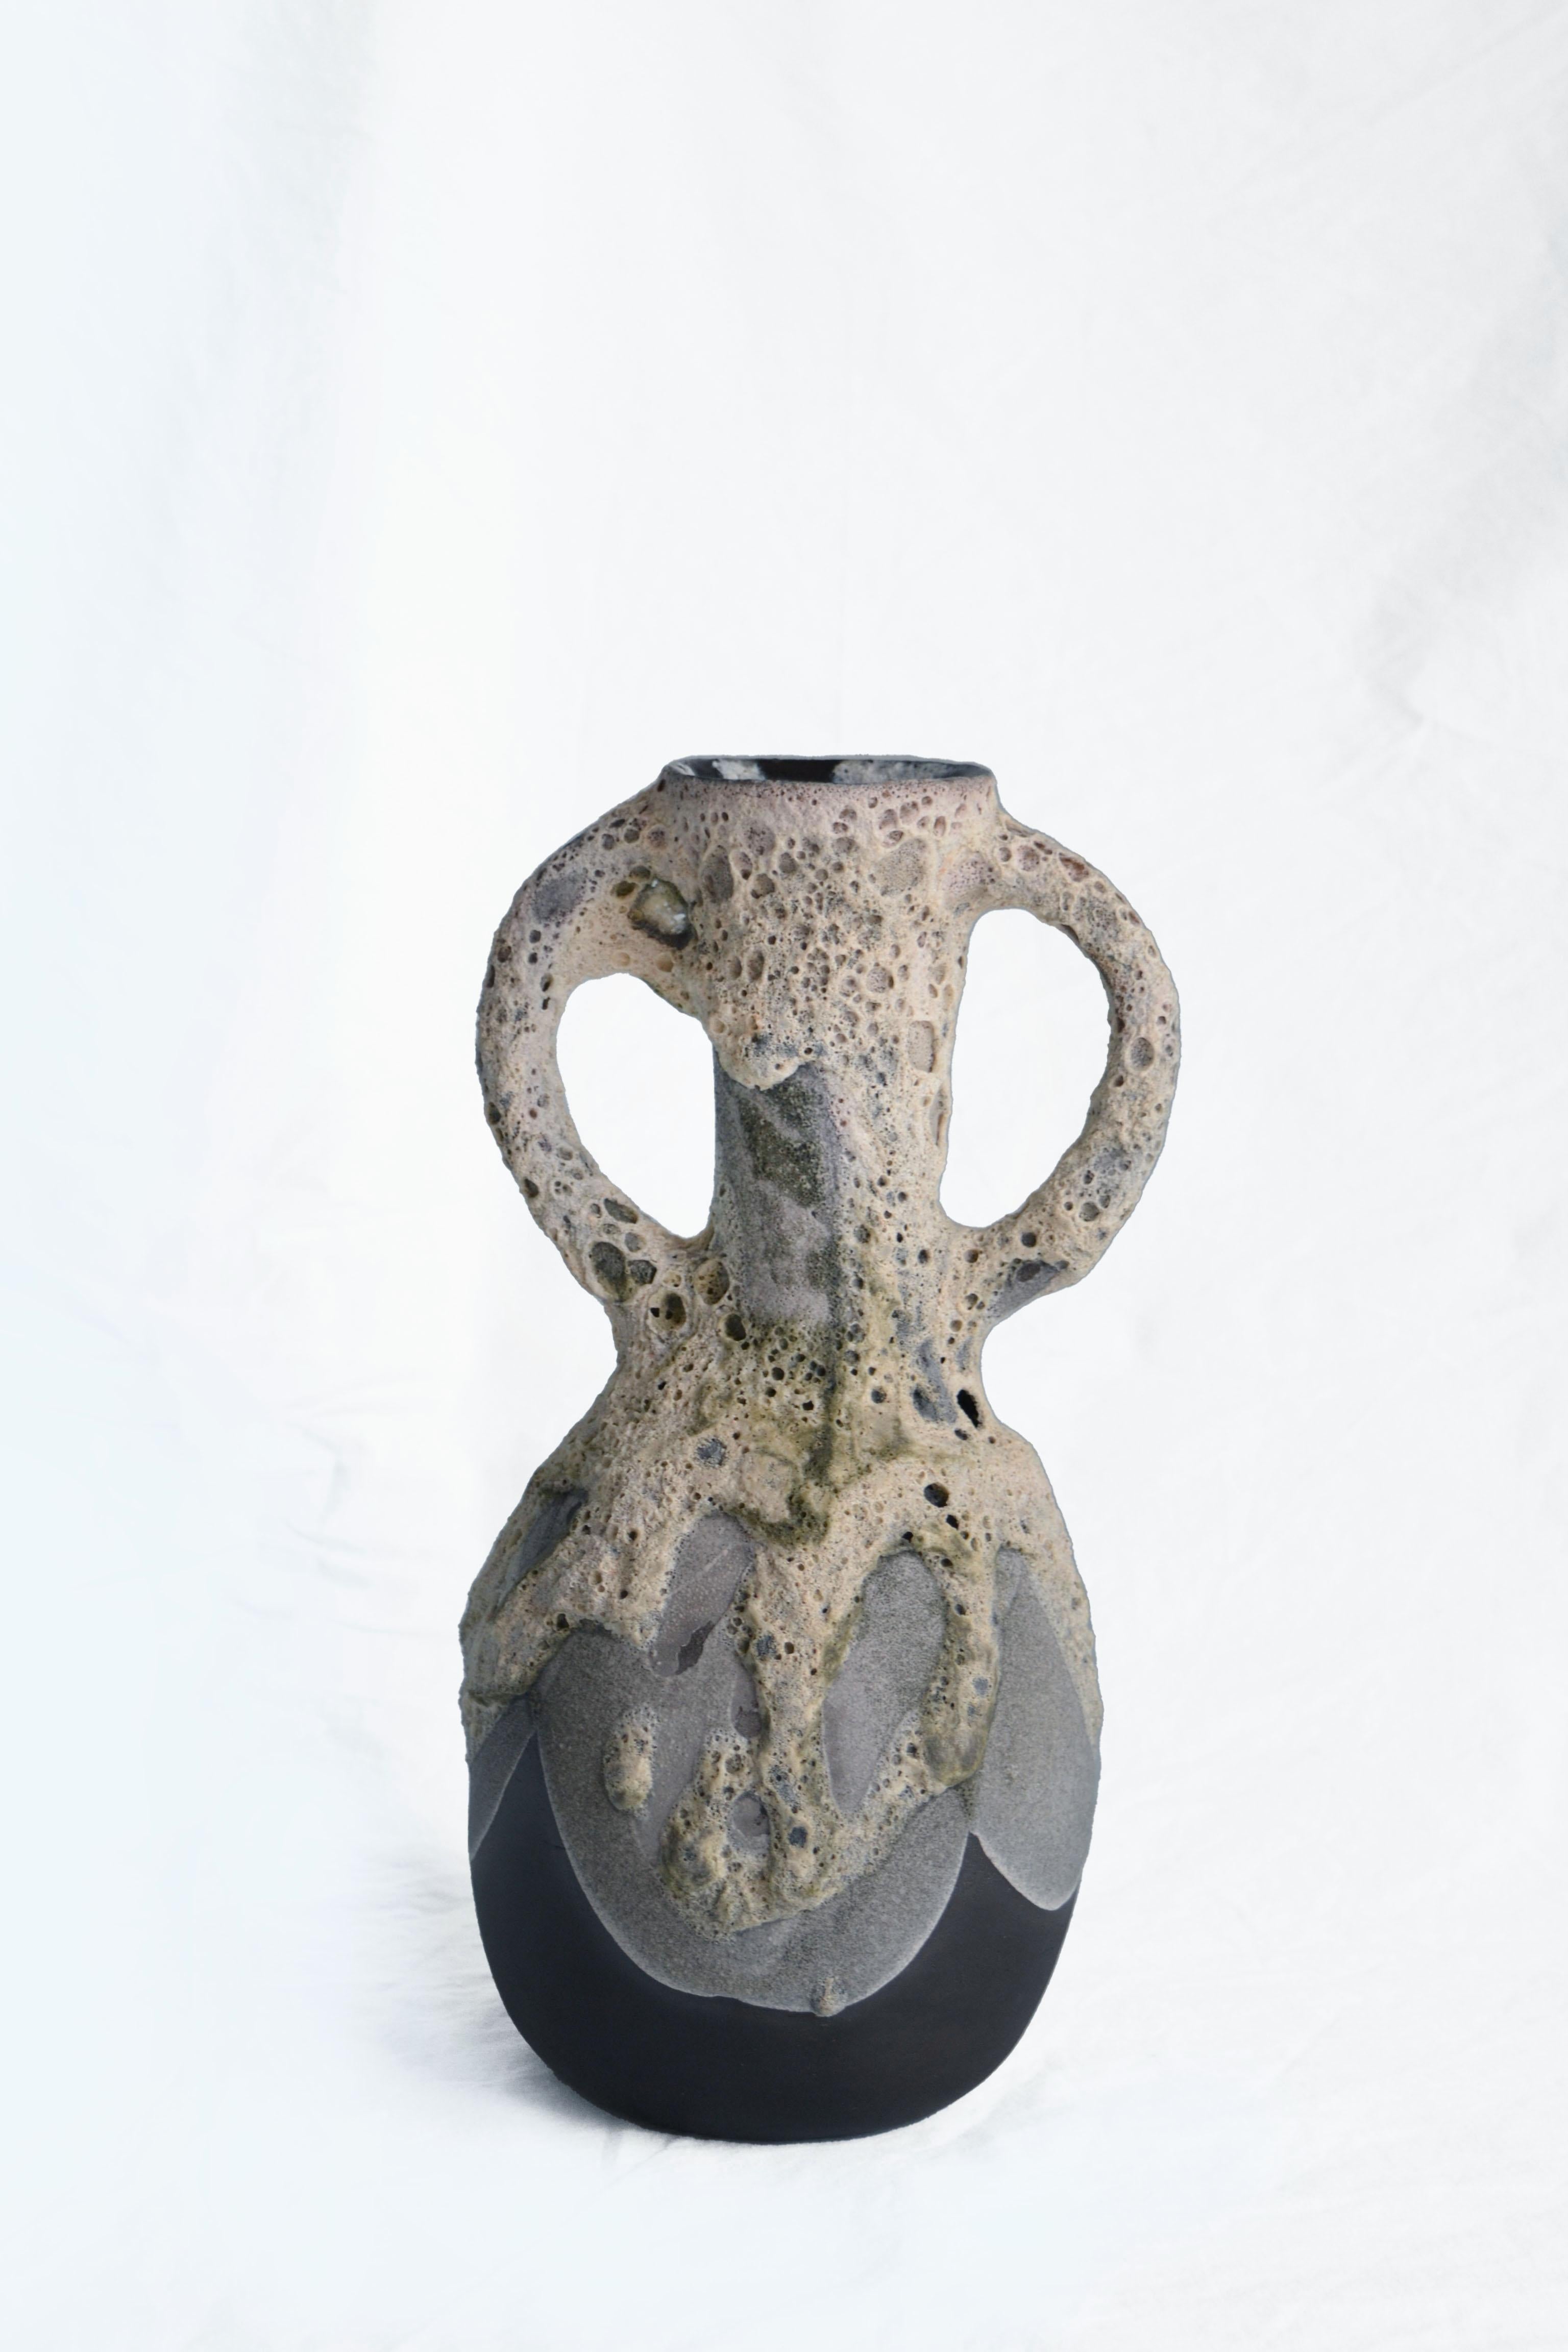 Carafe 3 vase by Anna Karountzou
Dimensions: W 16 x D 15 x H 30 cm
Materials: black stoneware clay, clear glaze inside, handmade crater glaze outside, fired at 1220

Born and based in Athens, Greece, with a background in conservation of works of